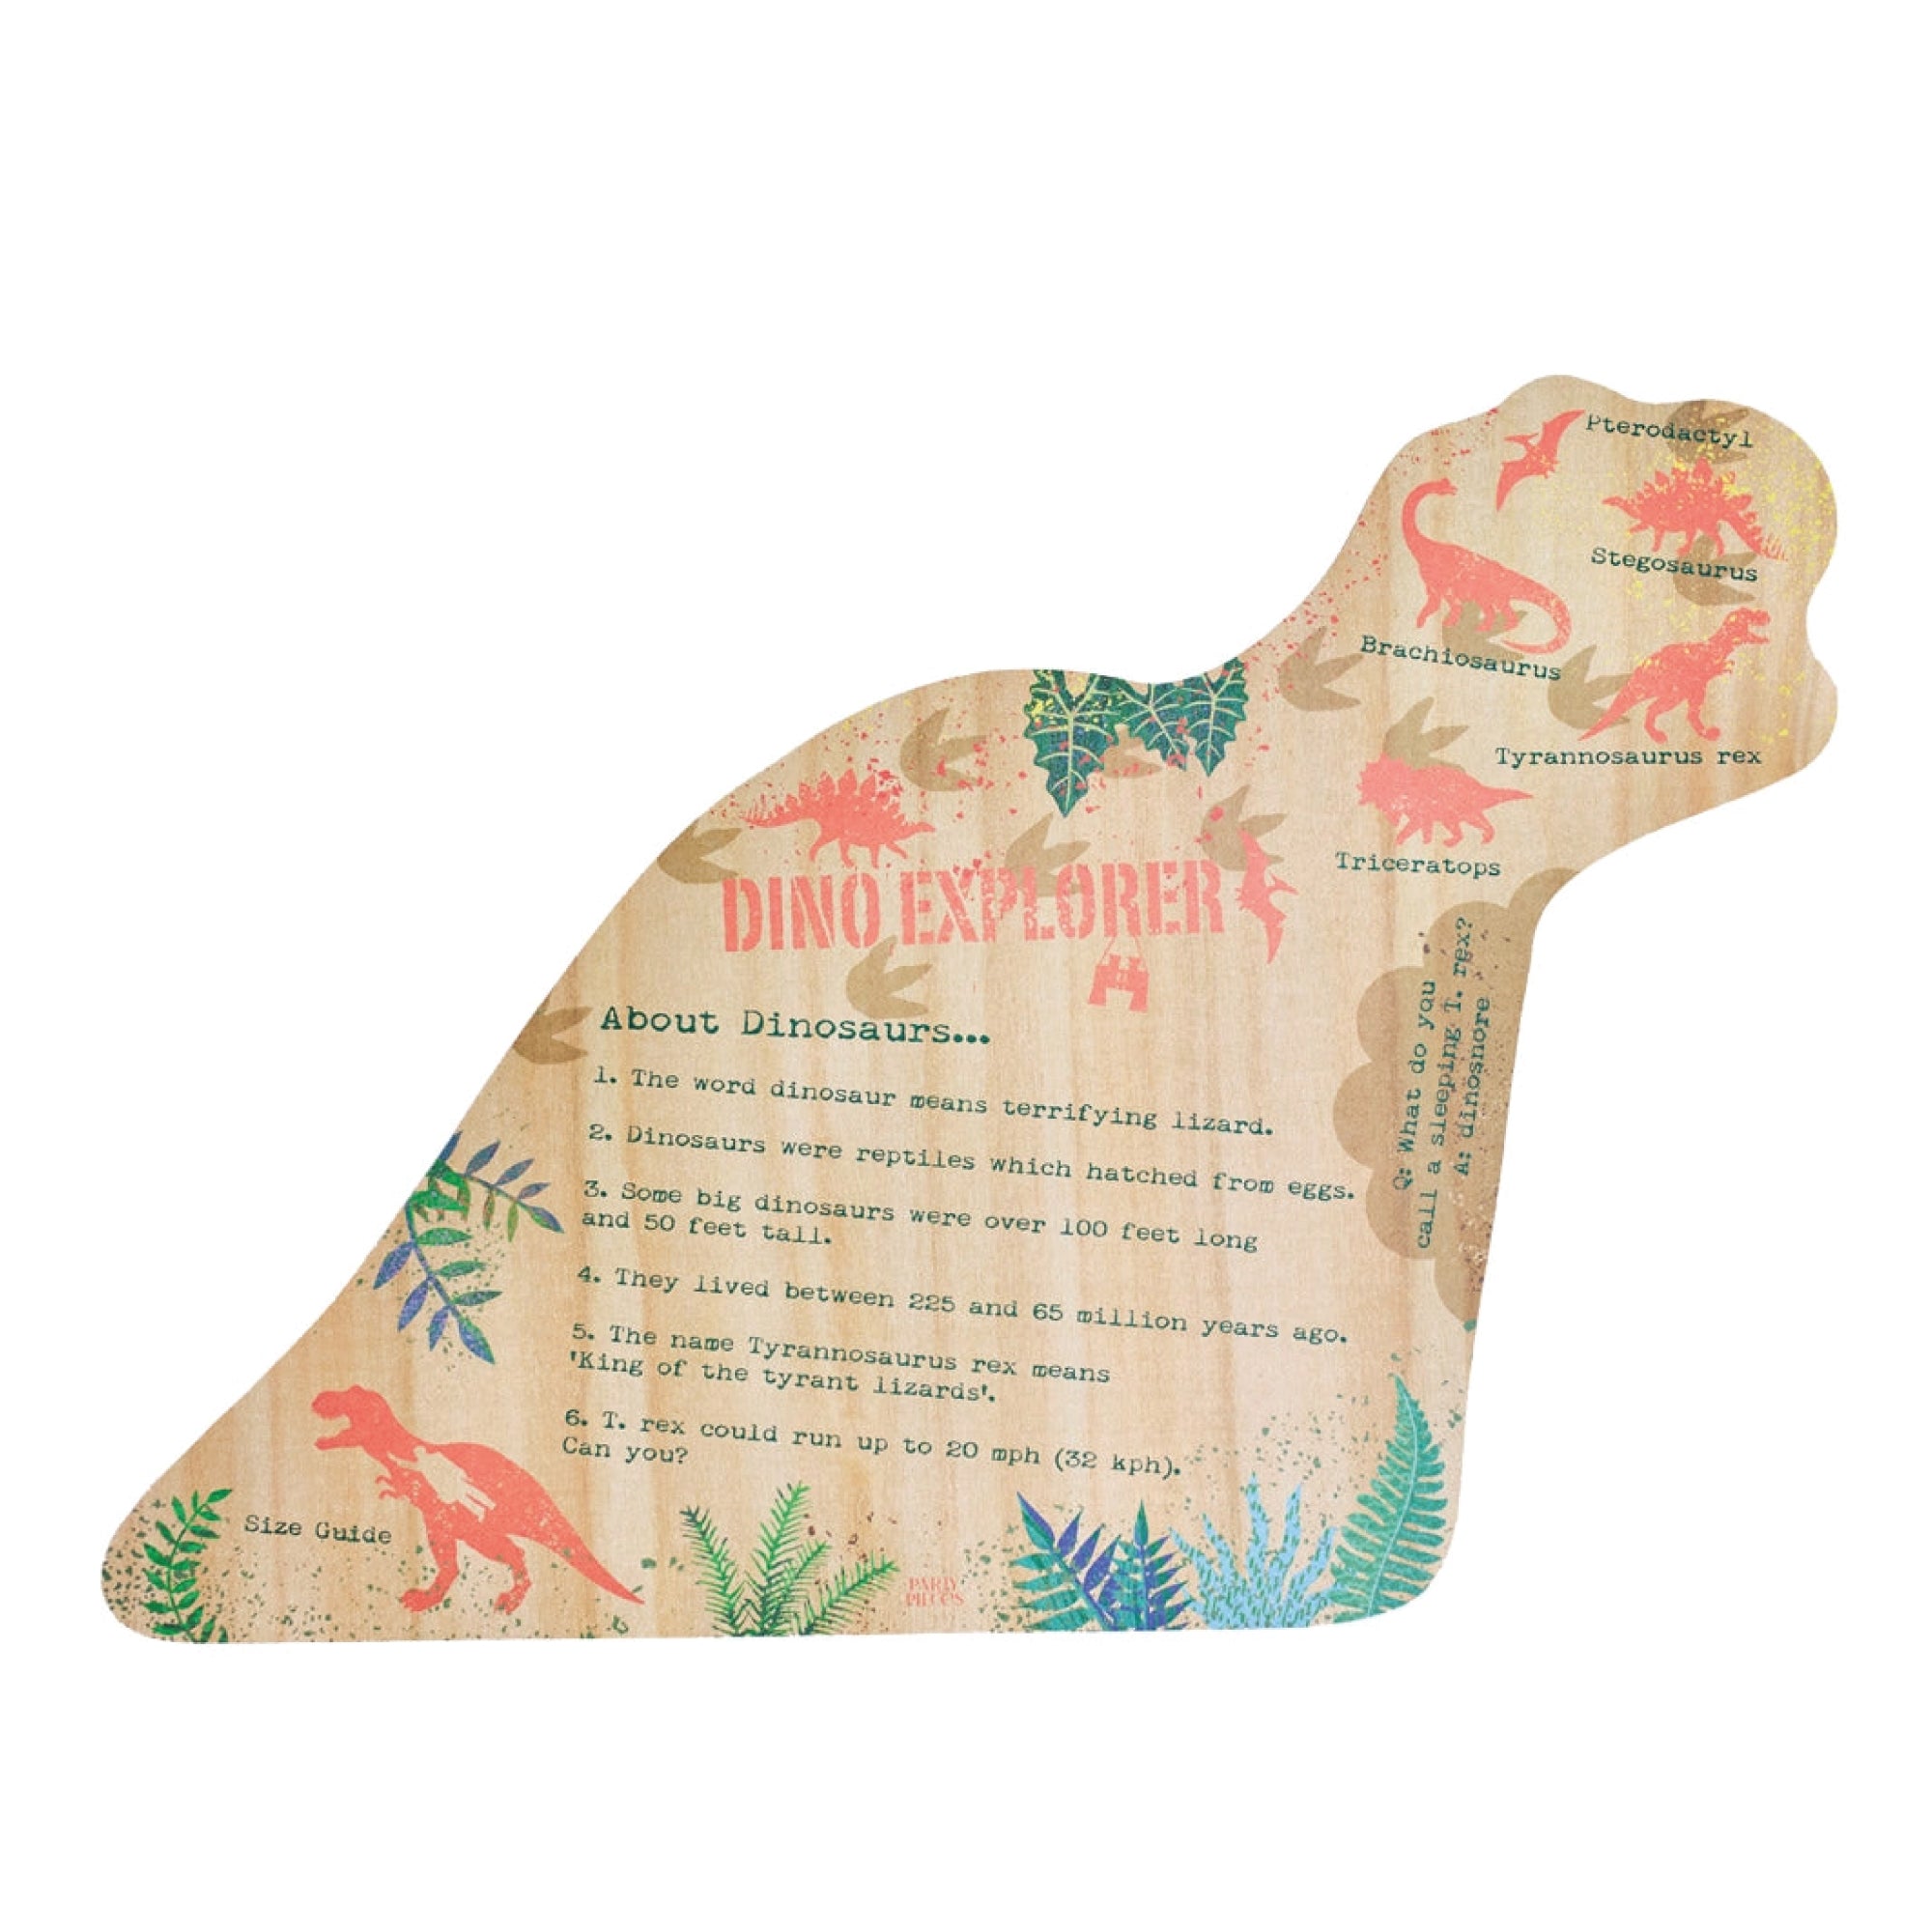 Dinosaur Explorer Paper Placemats 12ct | The Party Darling